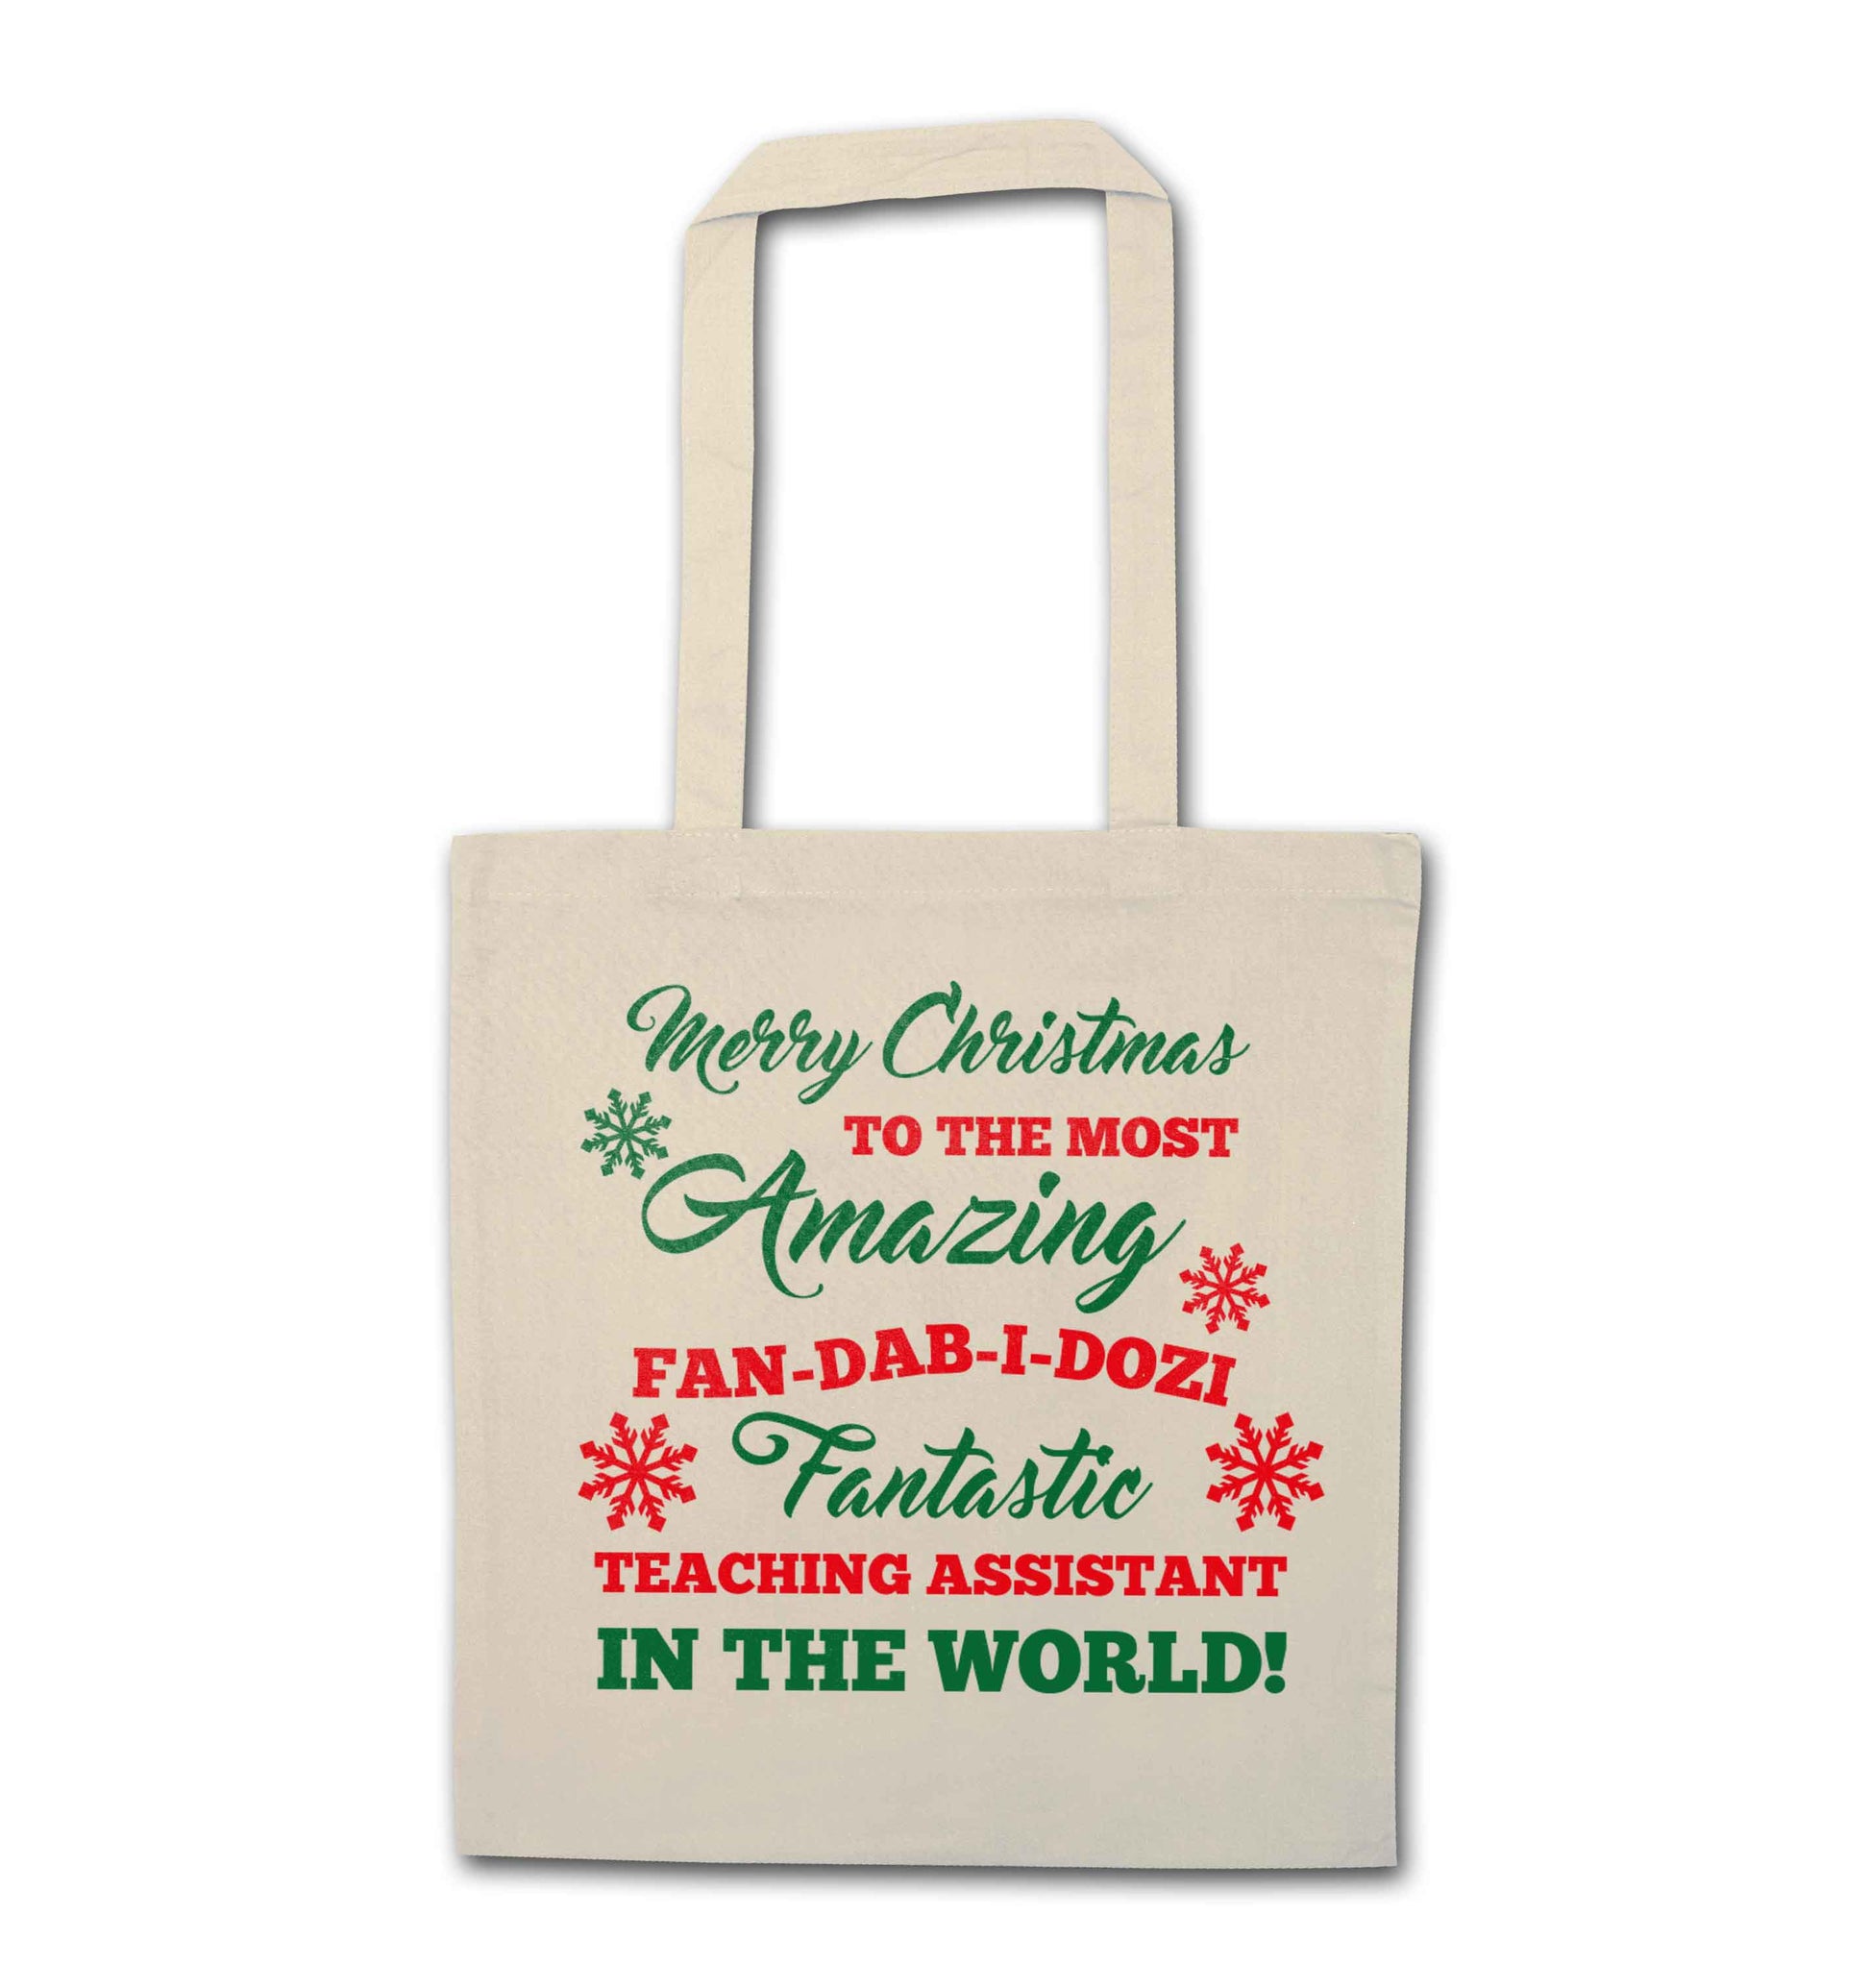 Merry Christmas to the most amazing fan-dab-i-dozi fantasic teaching assistant in the world natural tote bag